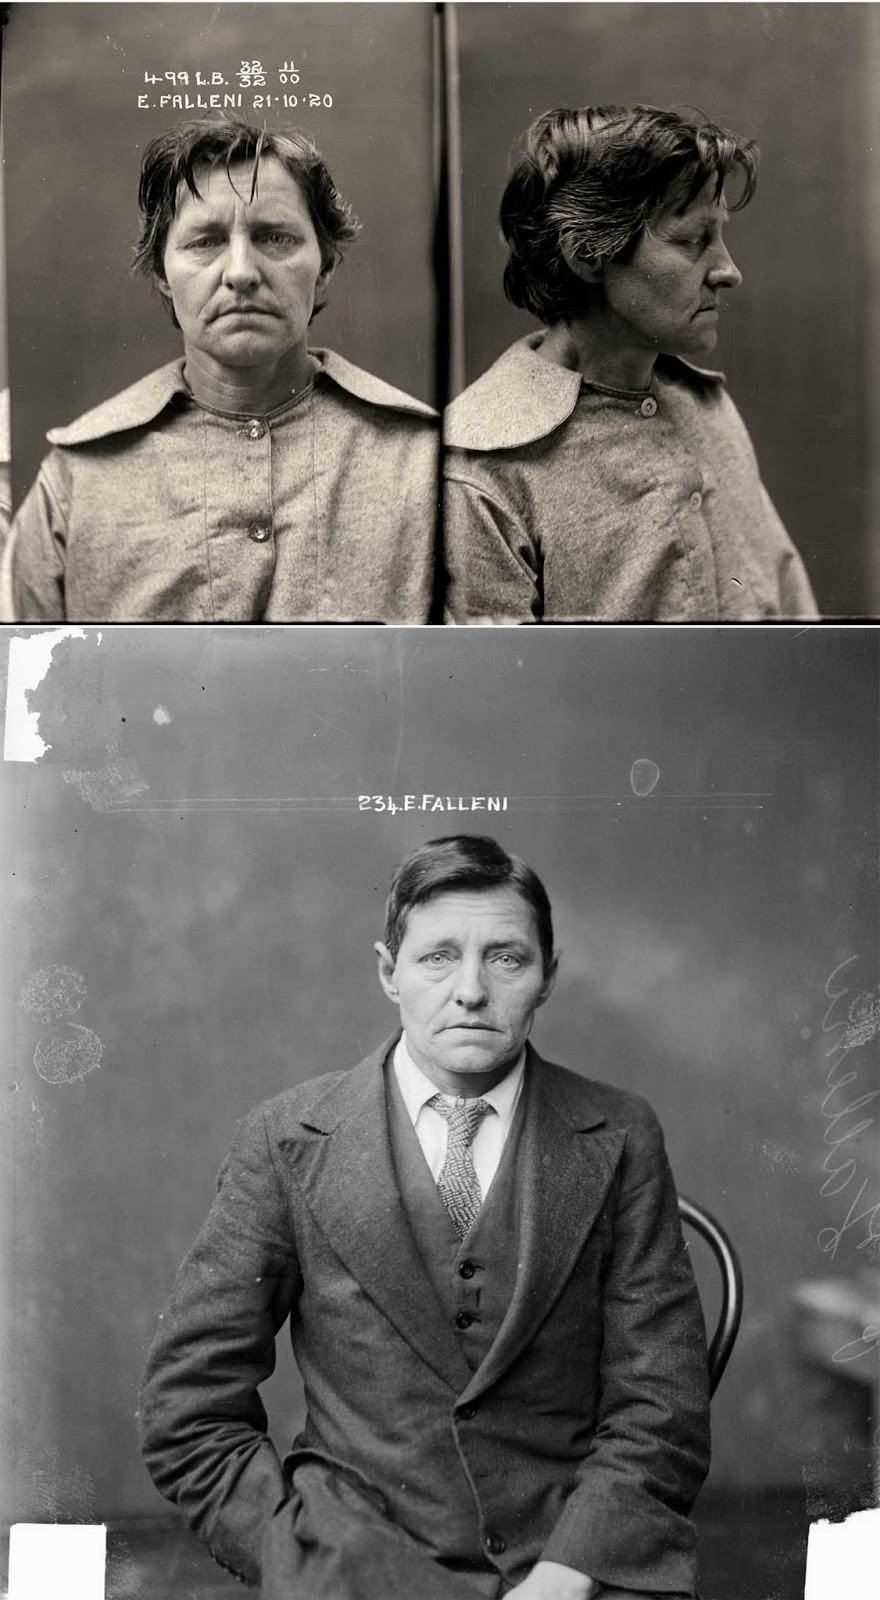 Vintage Criminals From The 1920s